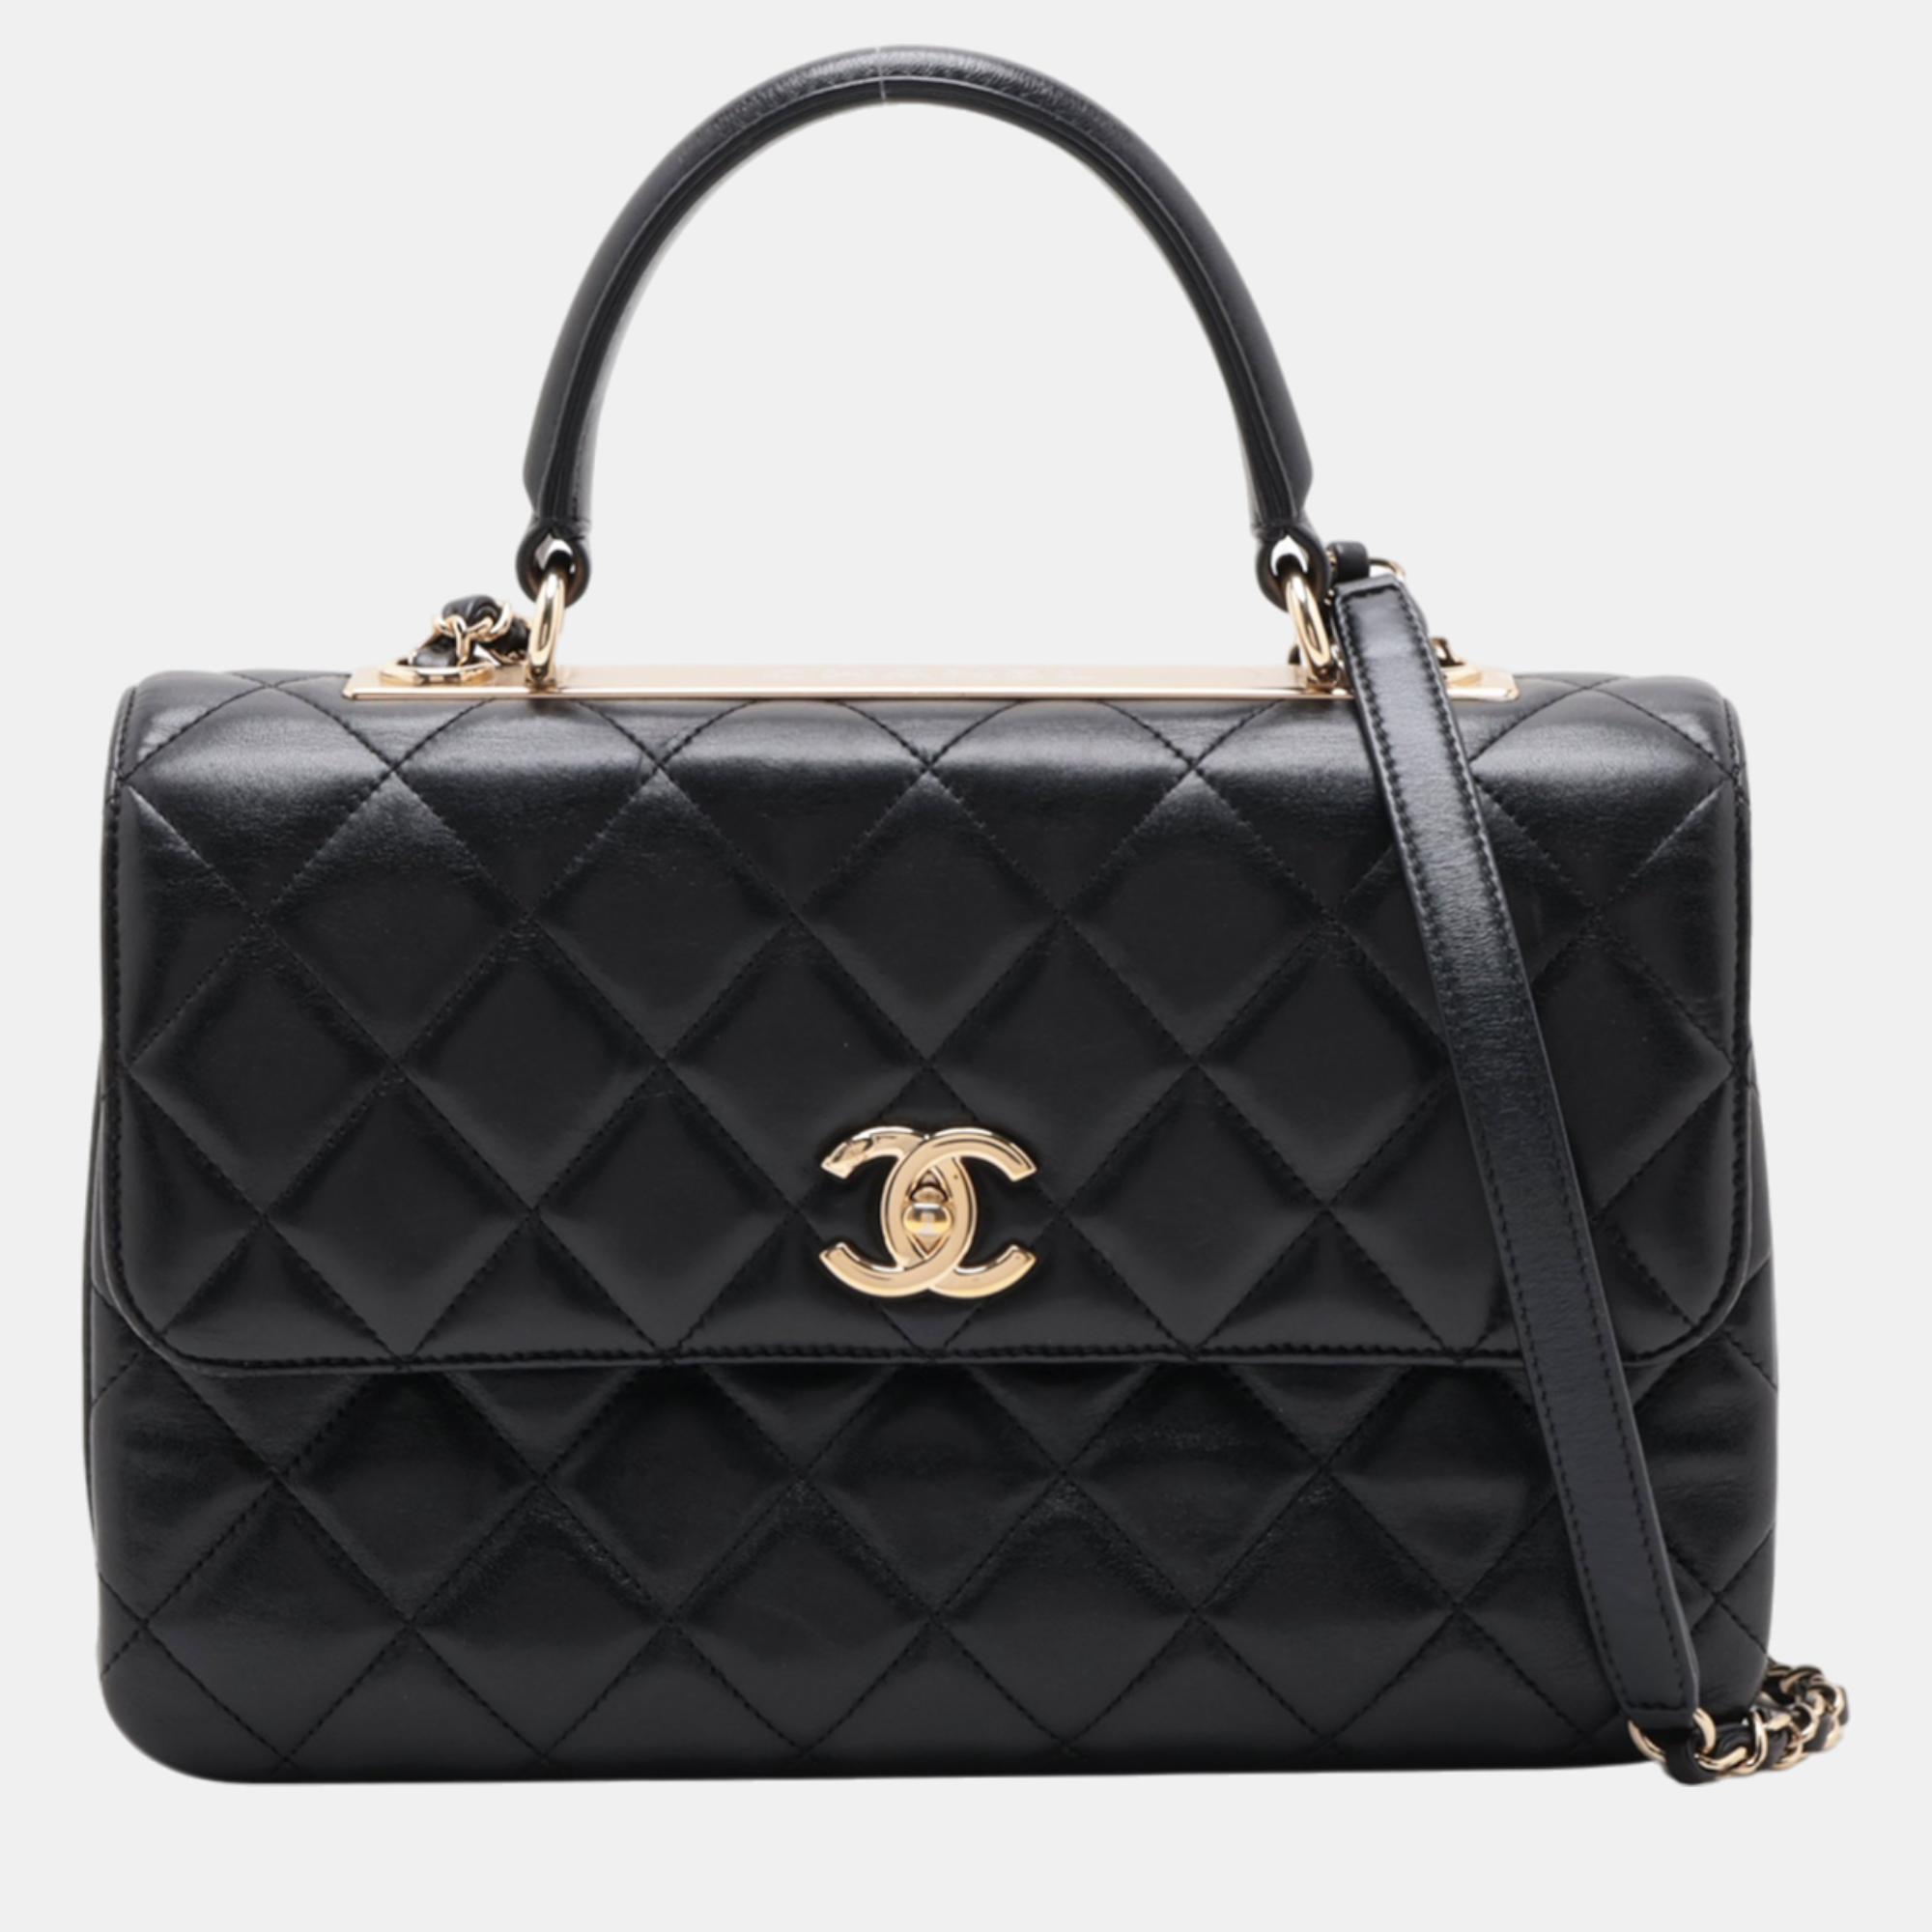 Uncompromising in quality and design this Chanel bag is a must have in any wardrobe. With its durable construction and luxurious finish its the perfect accessory for any occasion.